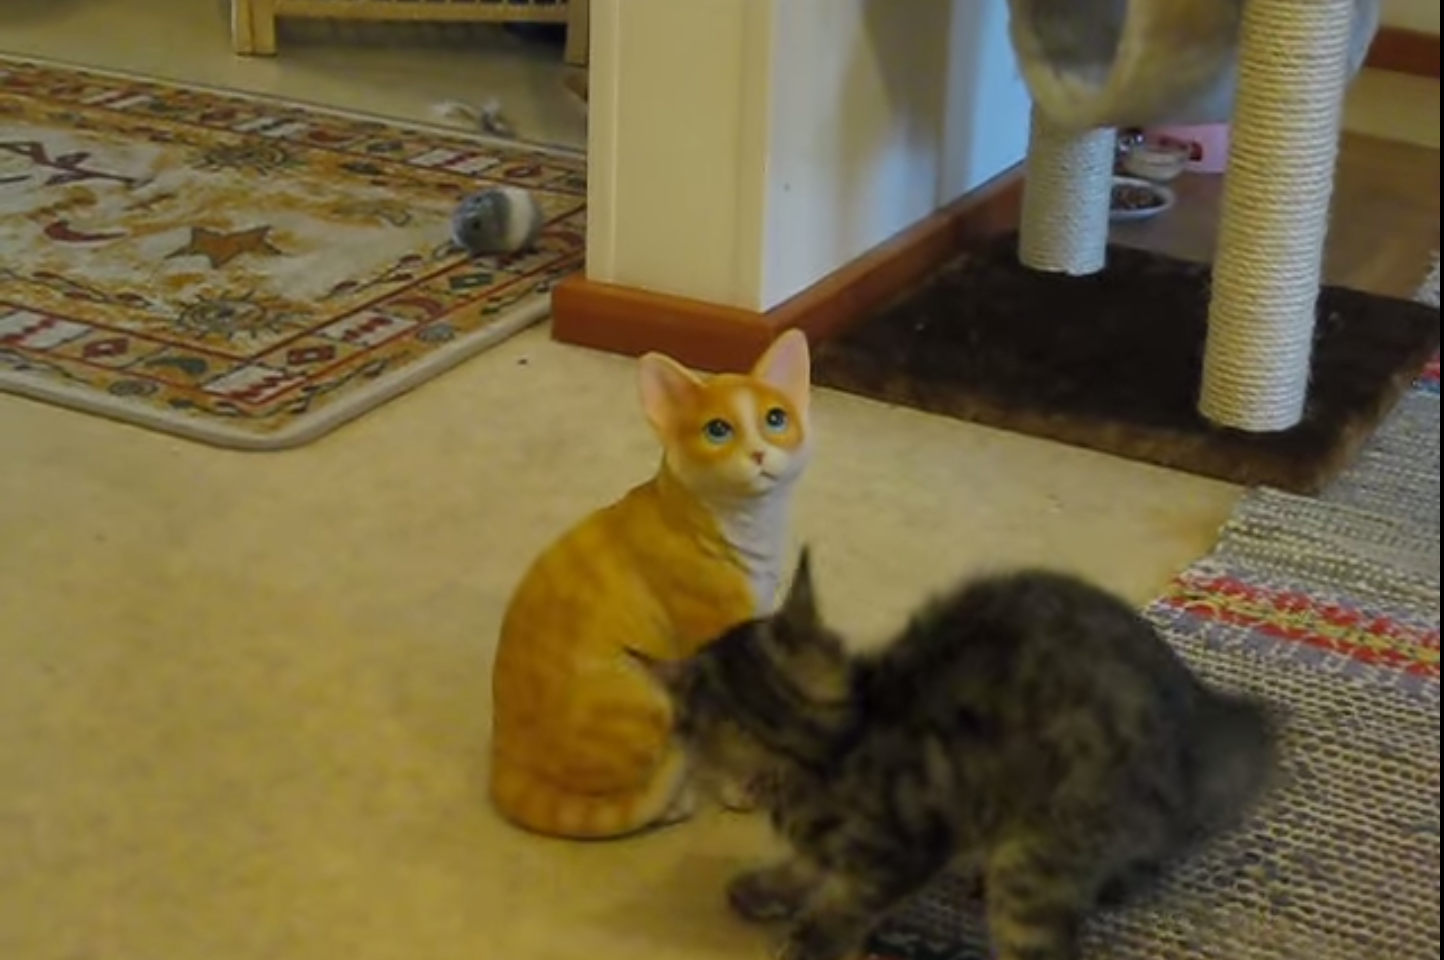 This cat doesn't seem to like other cats